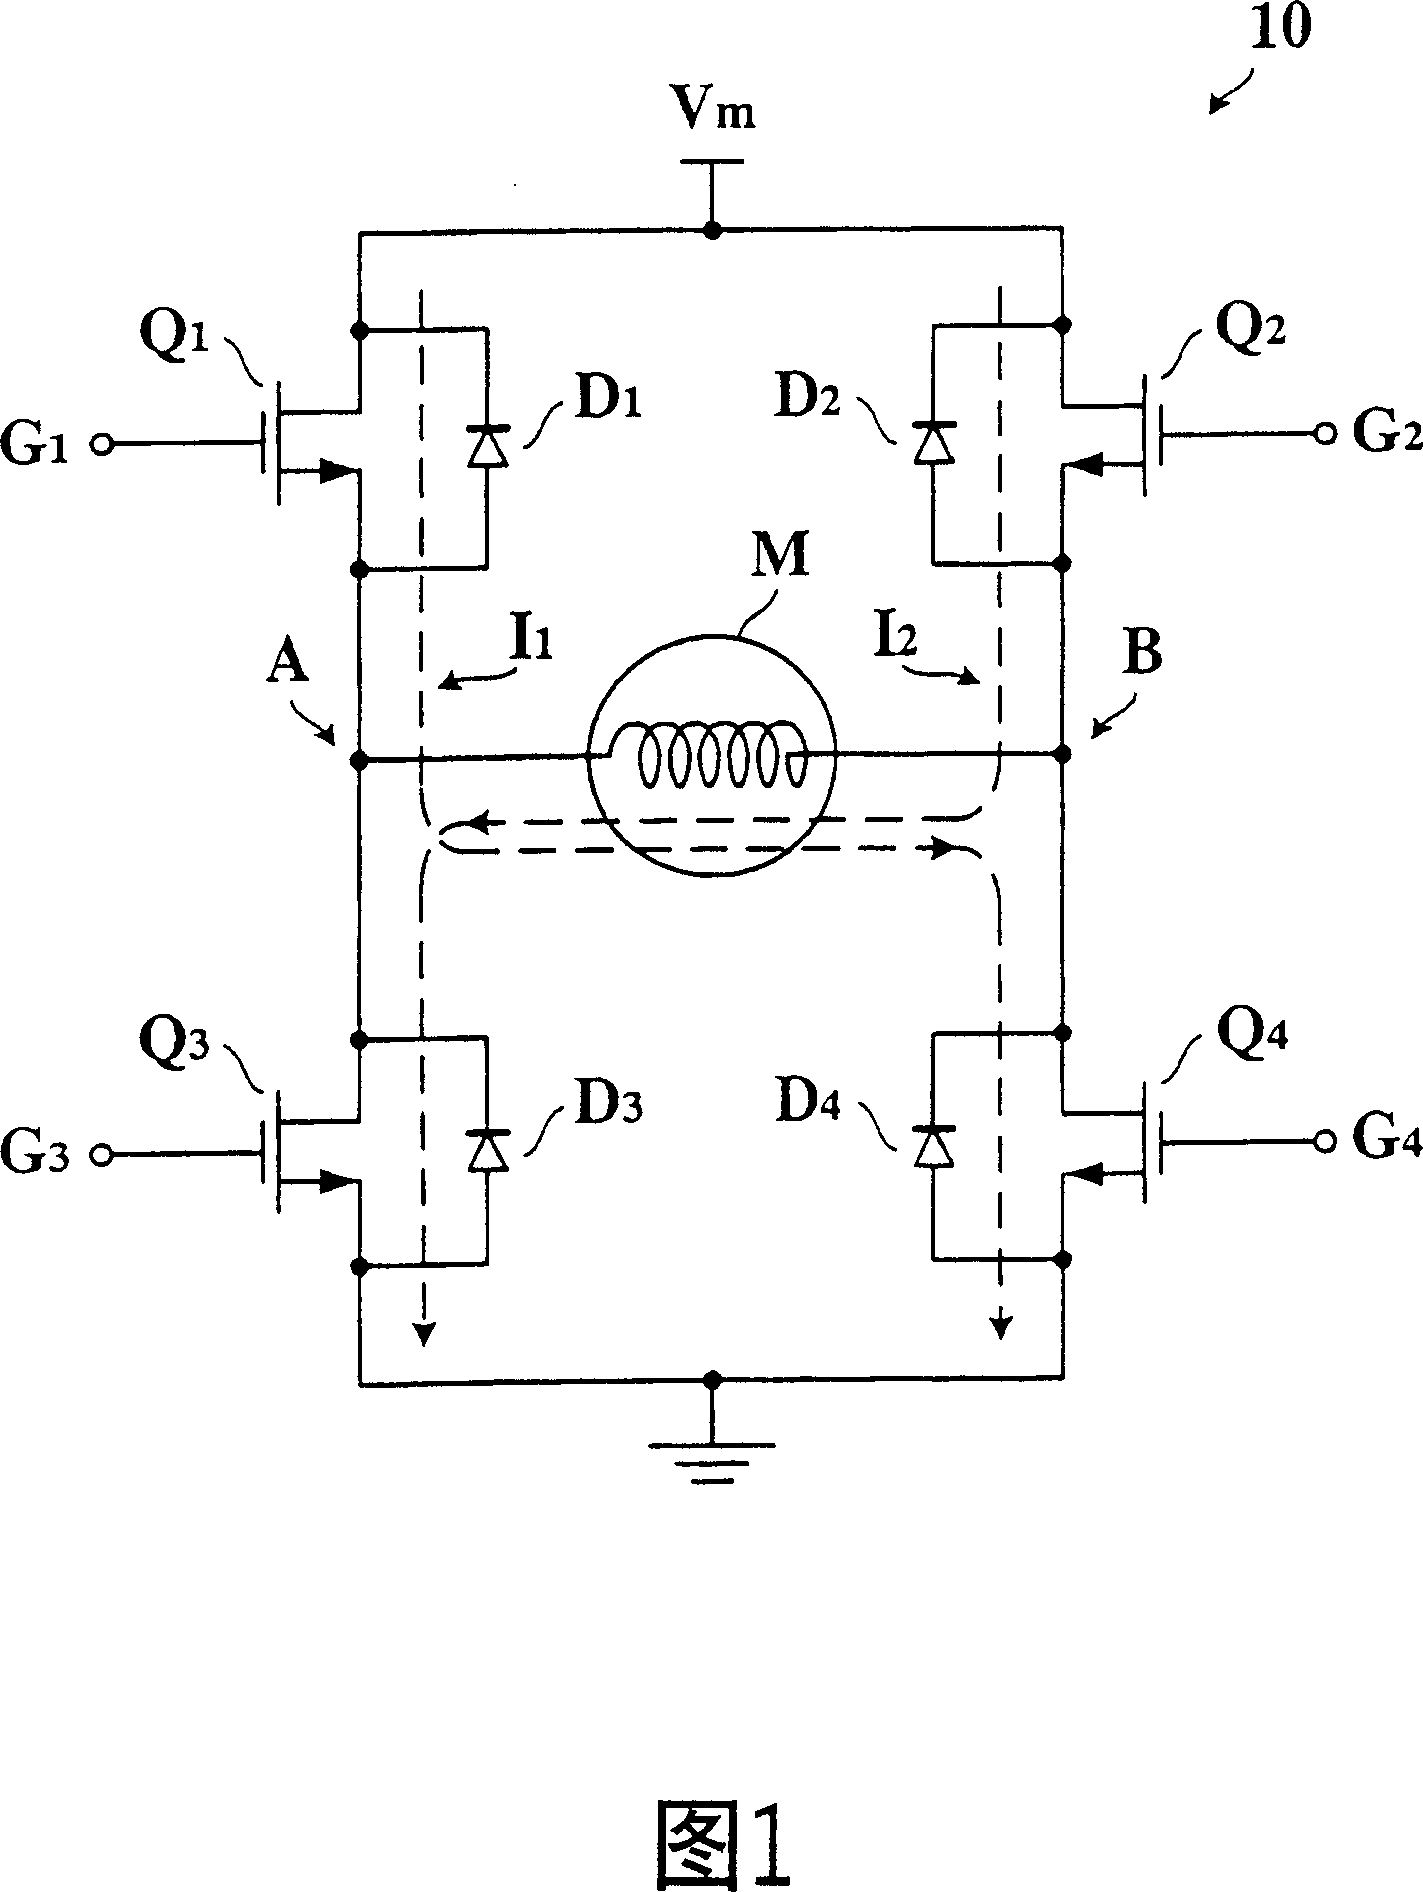 Motor controlling circuit with controllable driven voltage supply